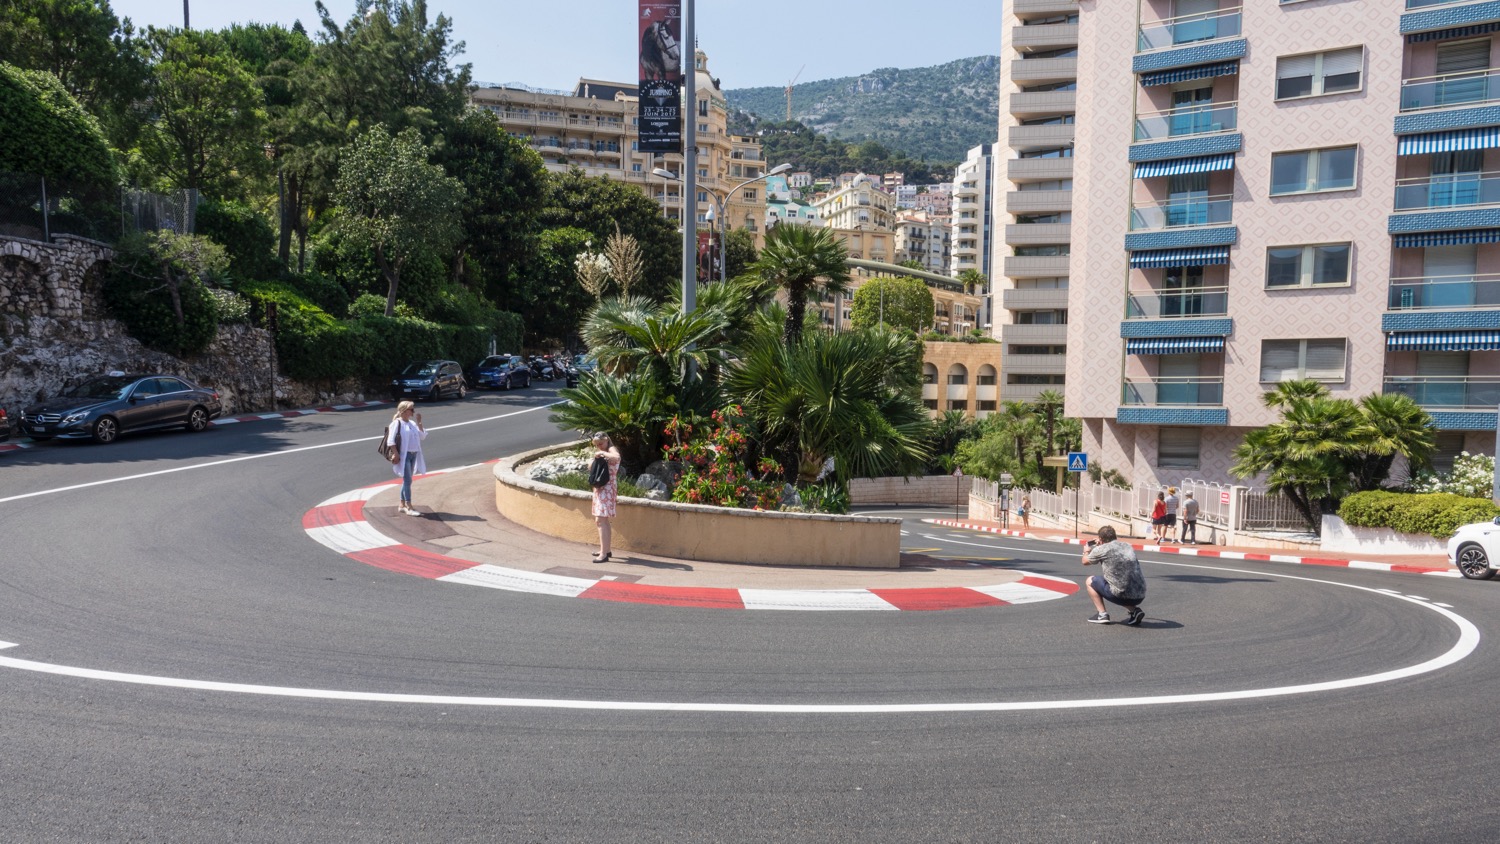 The iconic hairpin turn on the Formula 1 course